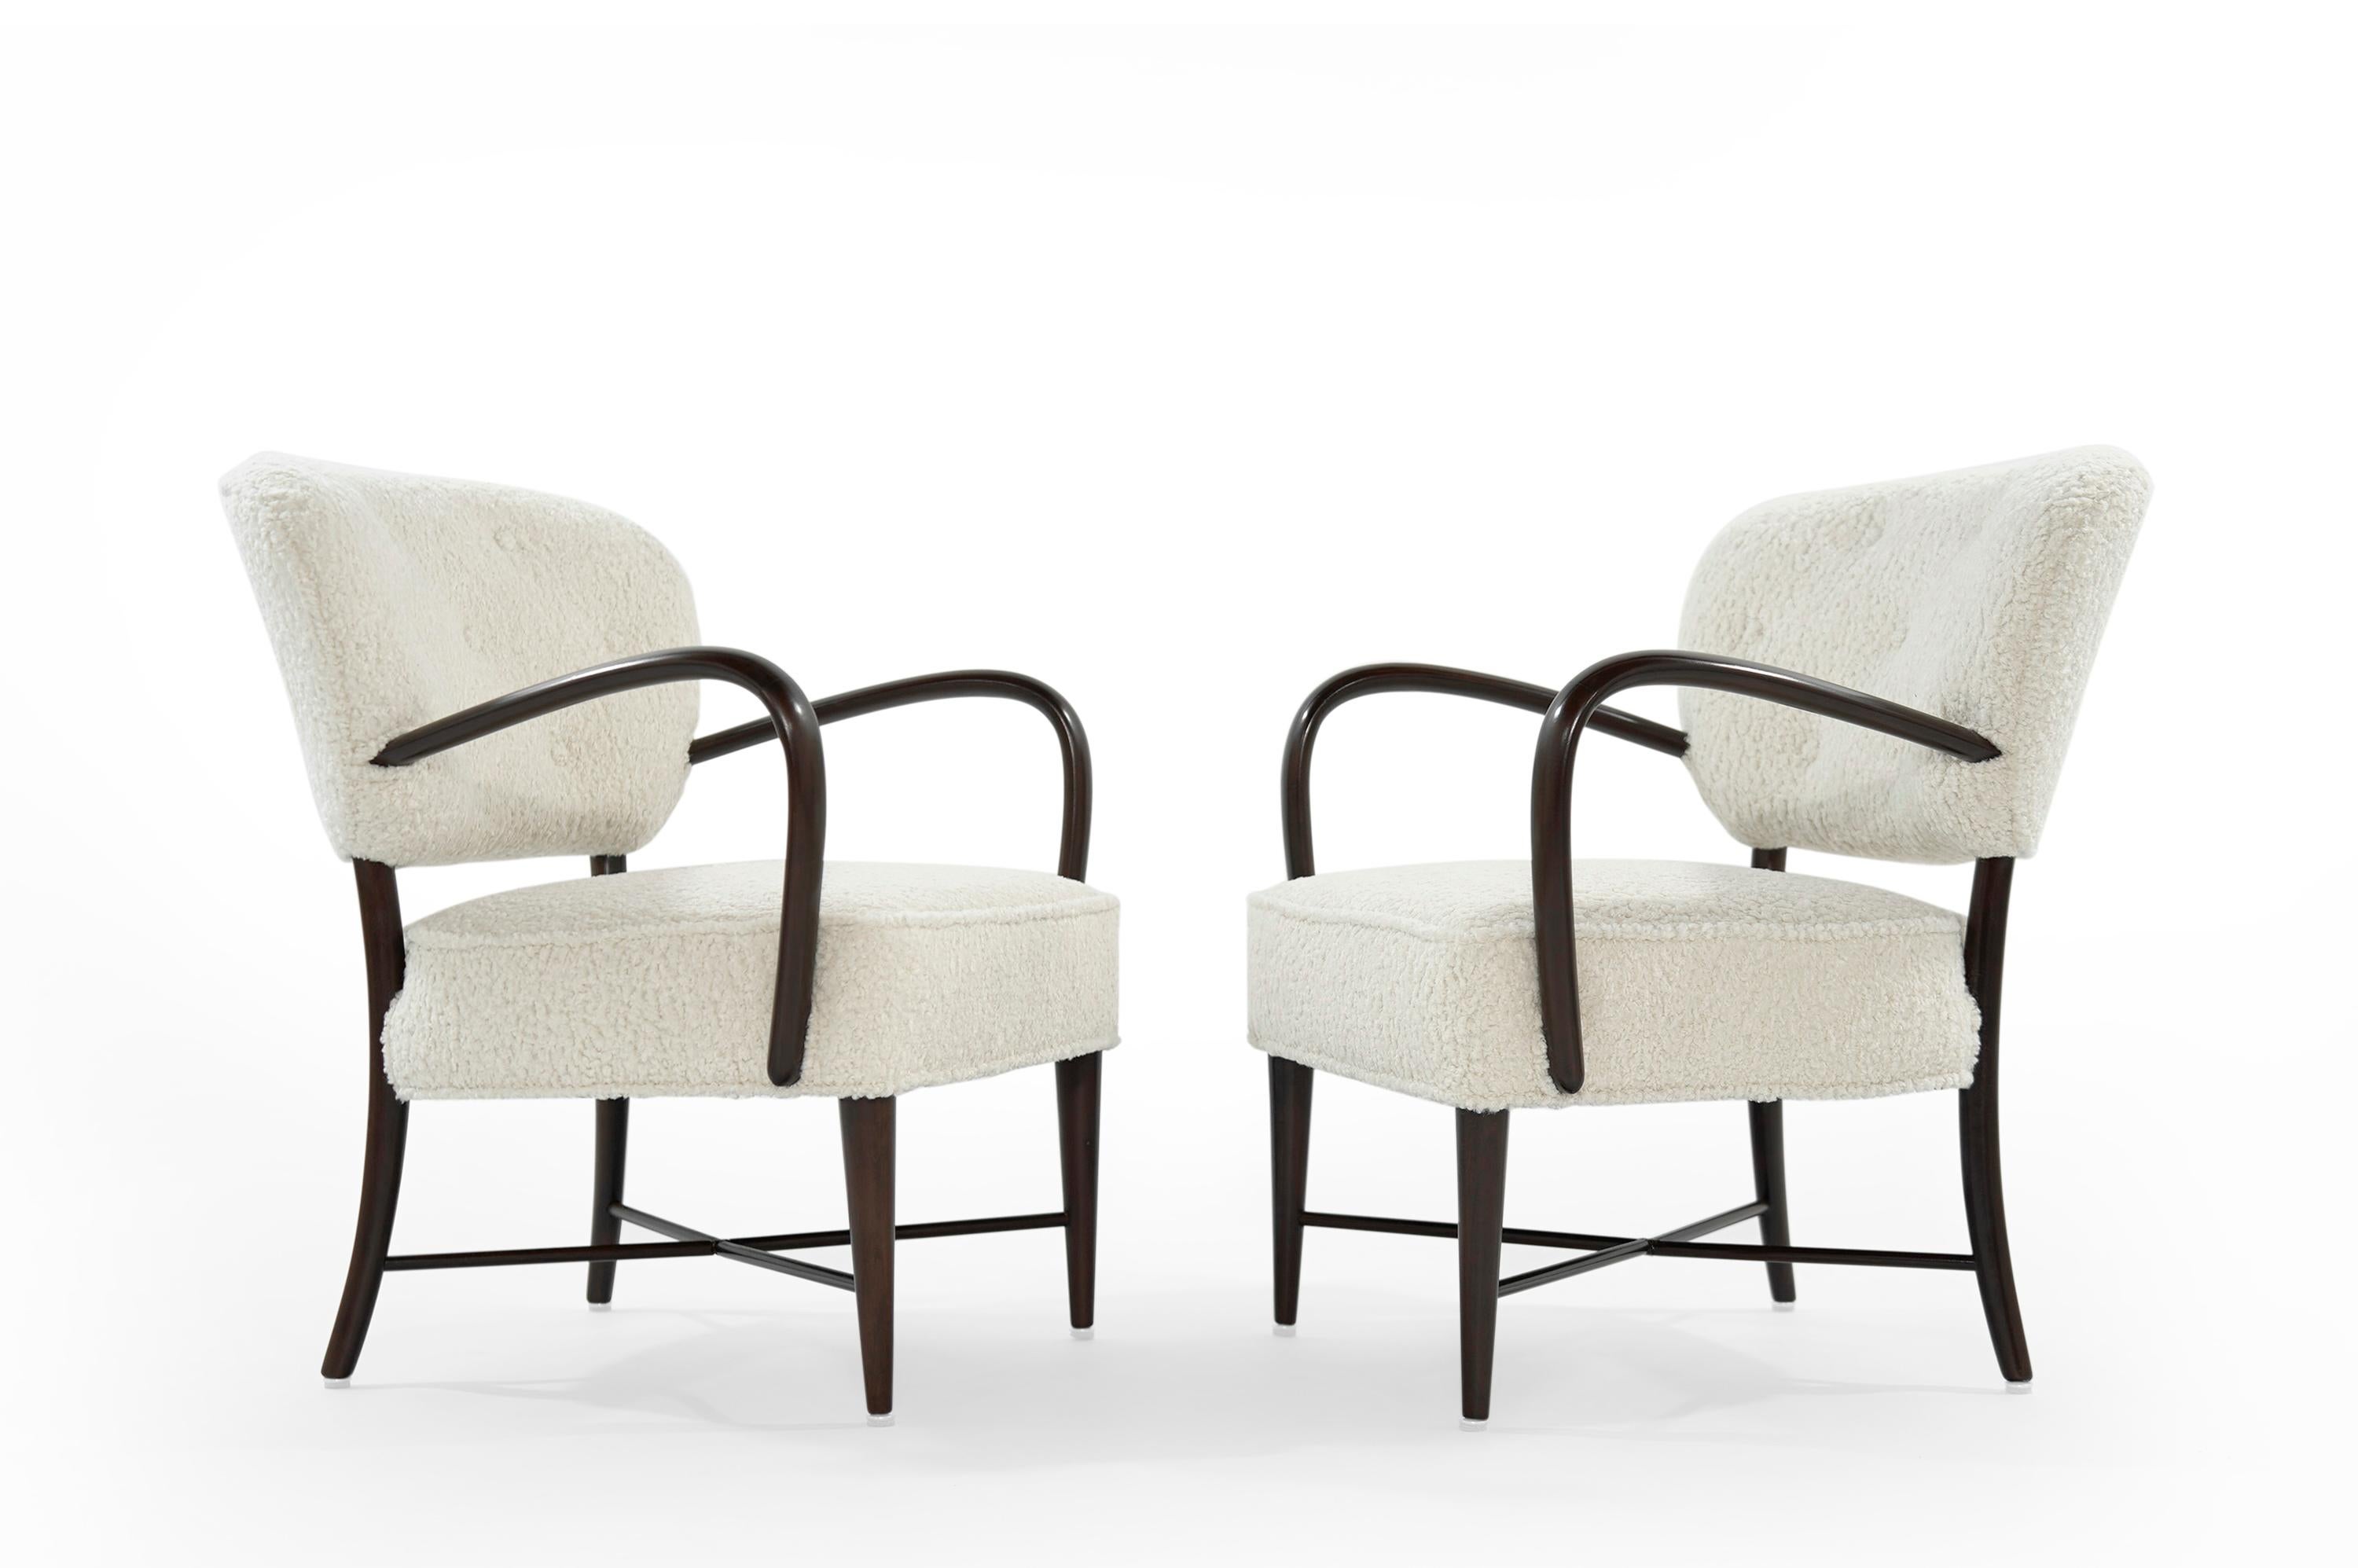 A handsome set of Italian open arm lounge chairs newly upholstered in bouclé by Kravet. Walnut frame fully restored.